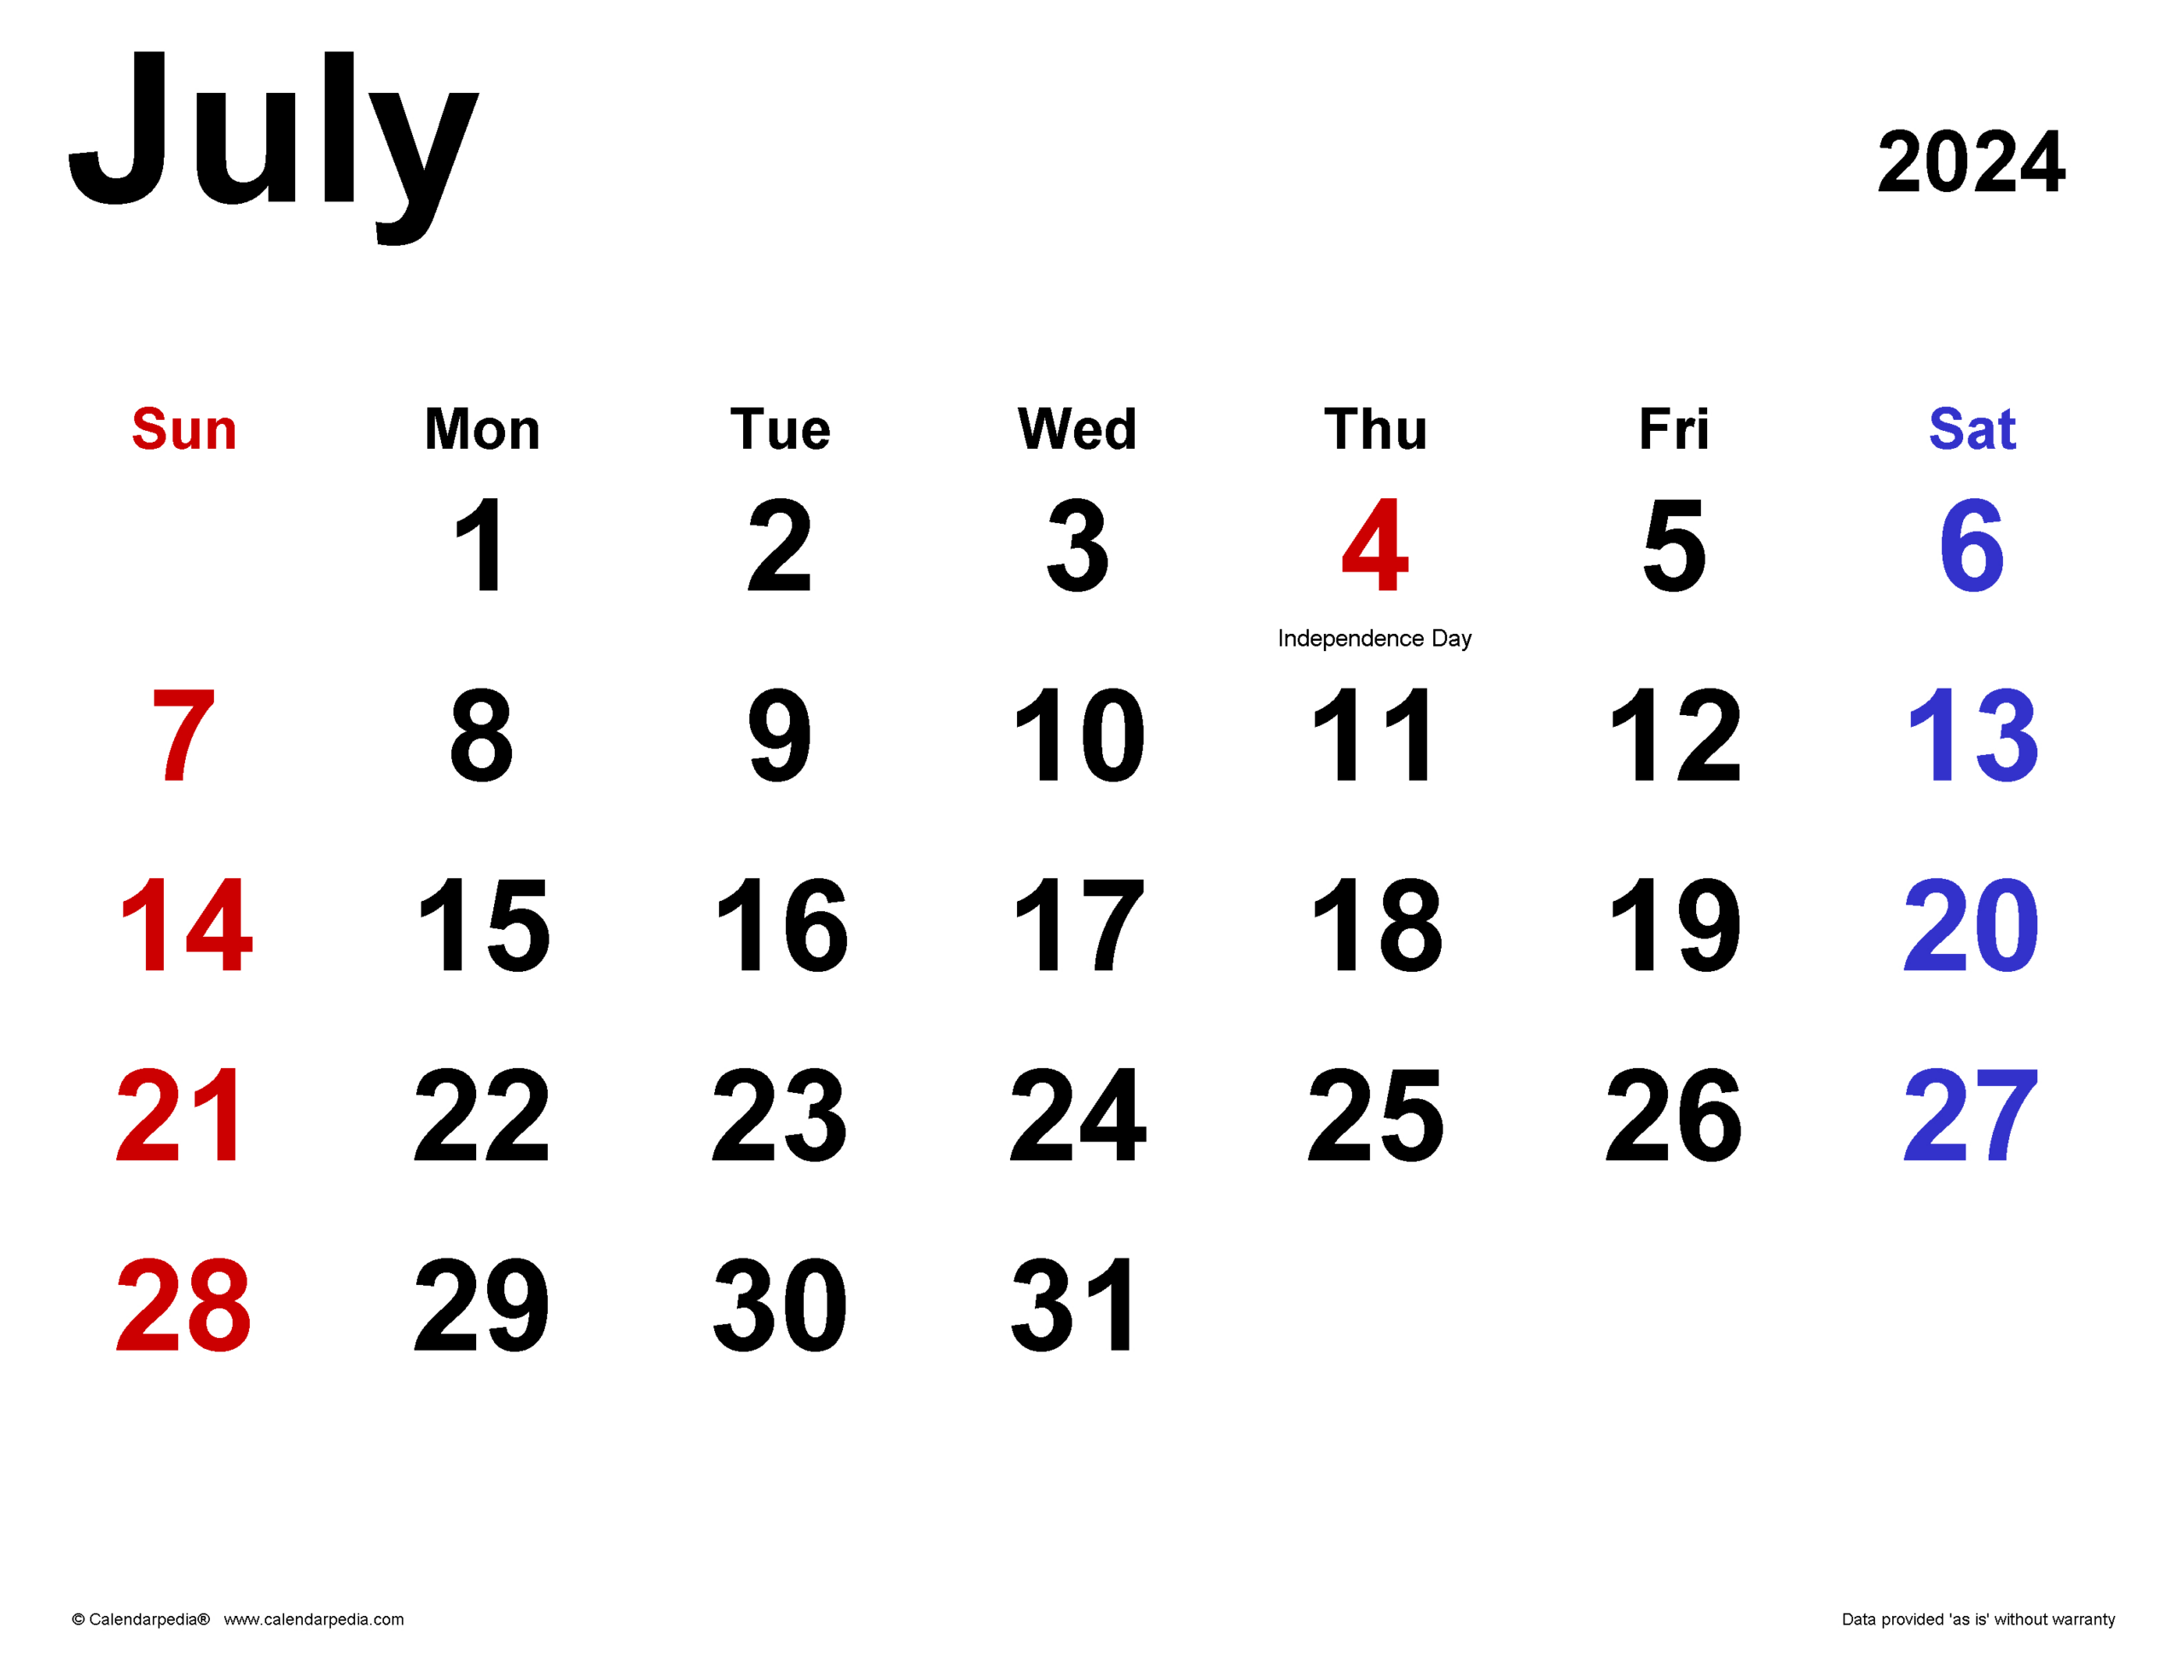 July 2024 Calendar | Templates For Word, Excel And Pdf throughout July 2024 Calendar Special Days